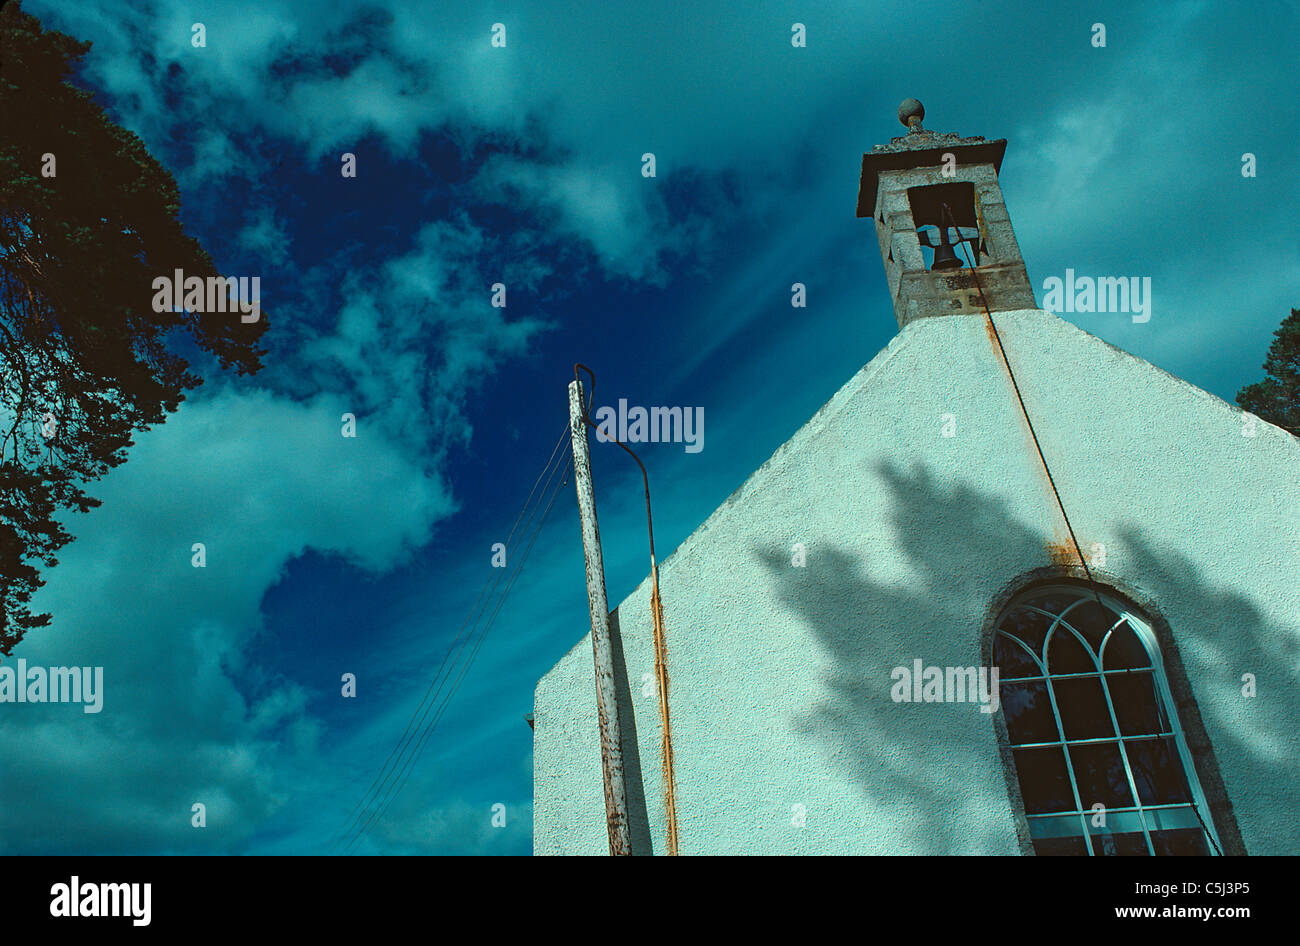 Semi-abstract image of white-wasked gable and belfry of small village church jutting at an angle up into a deep blue and cloudy Stock Photo